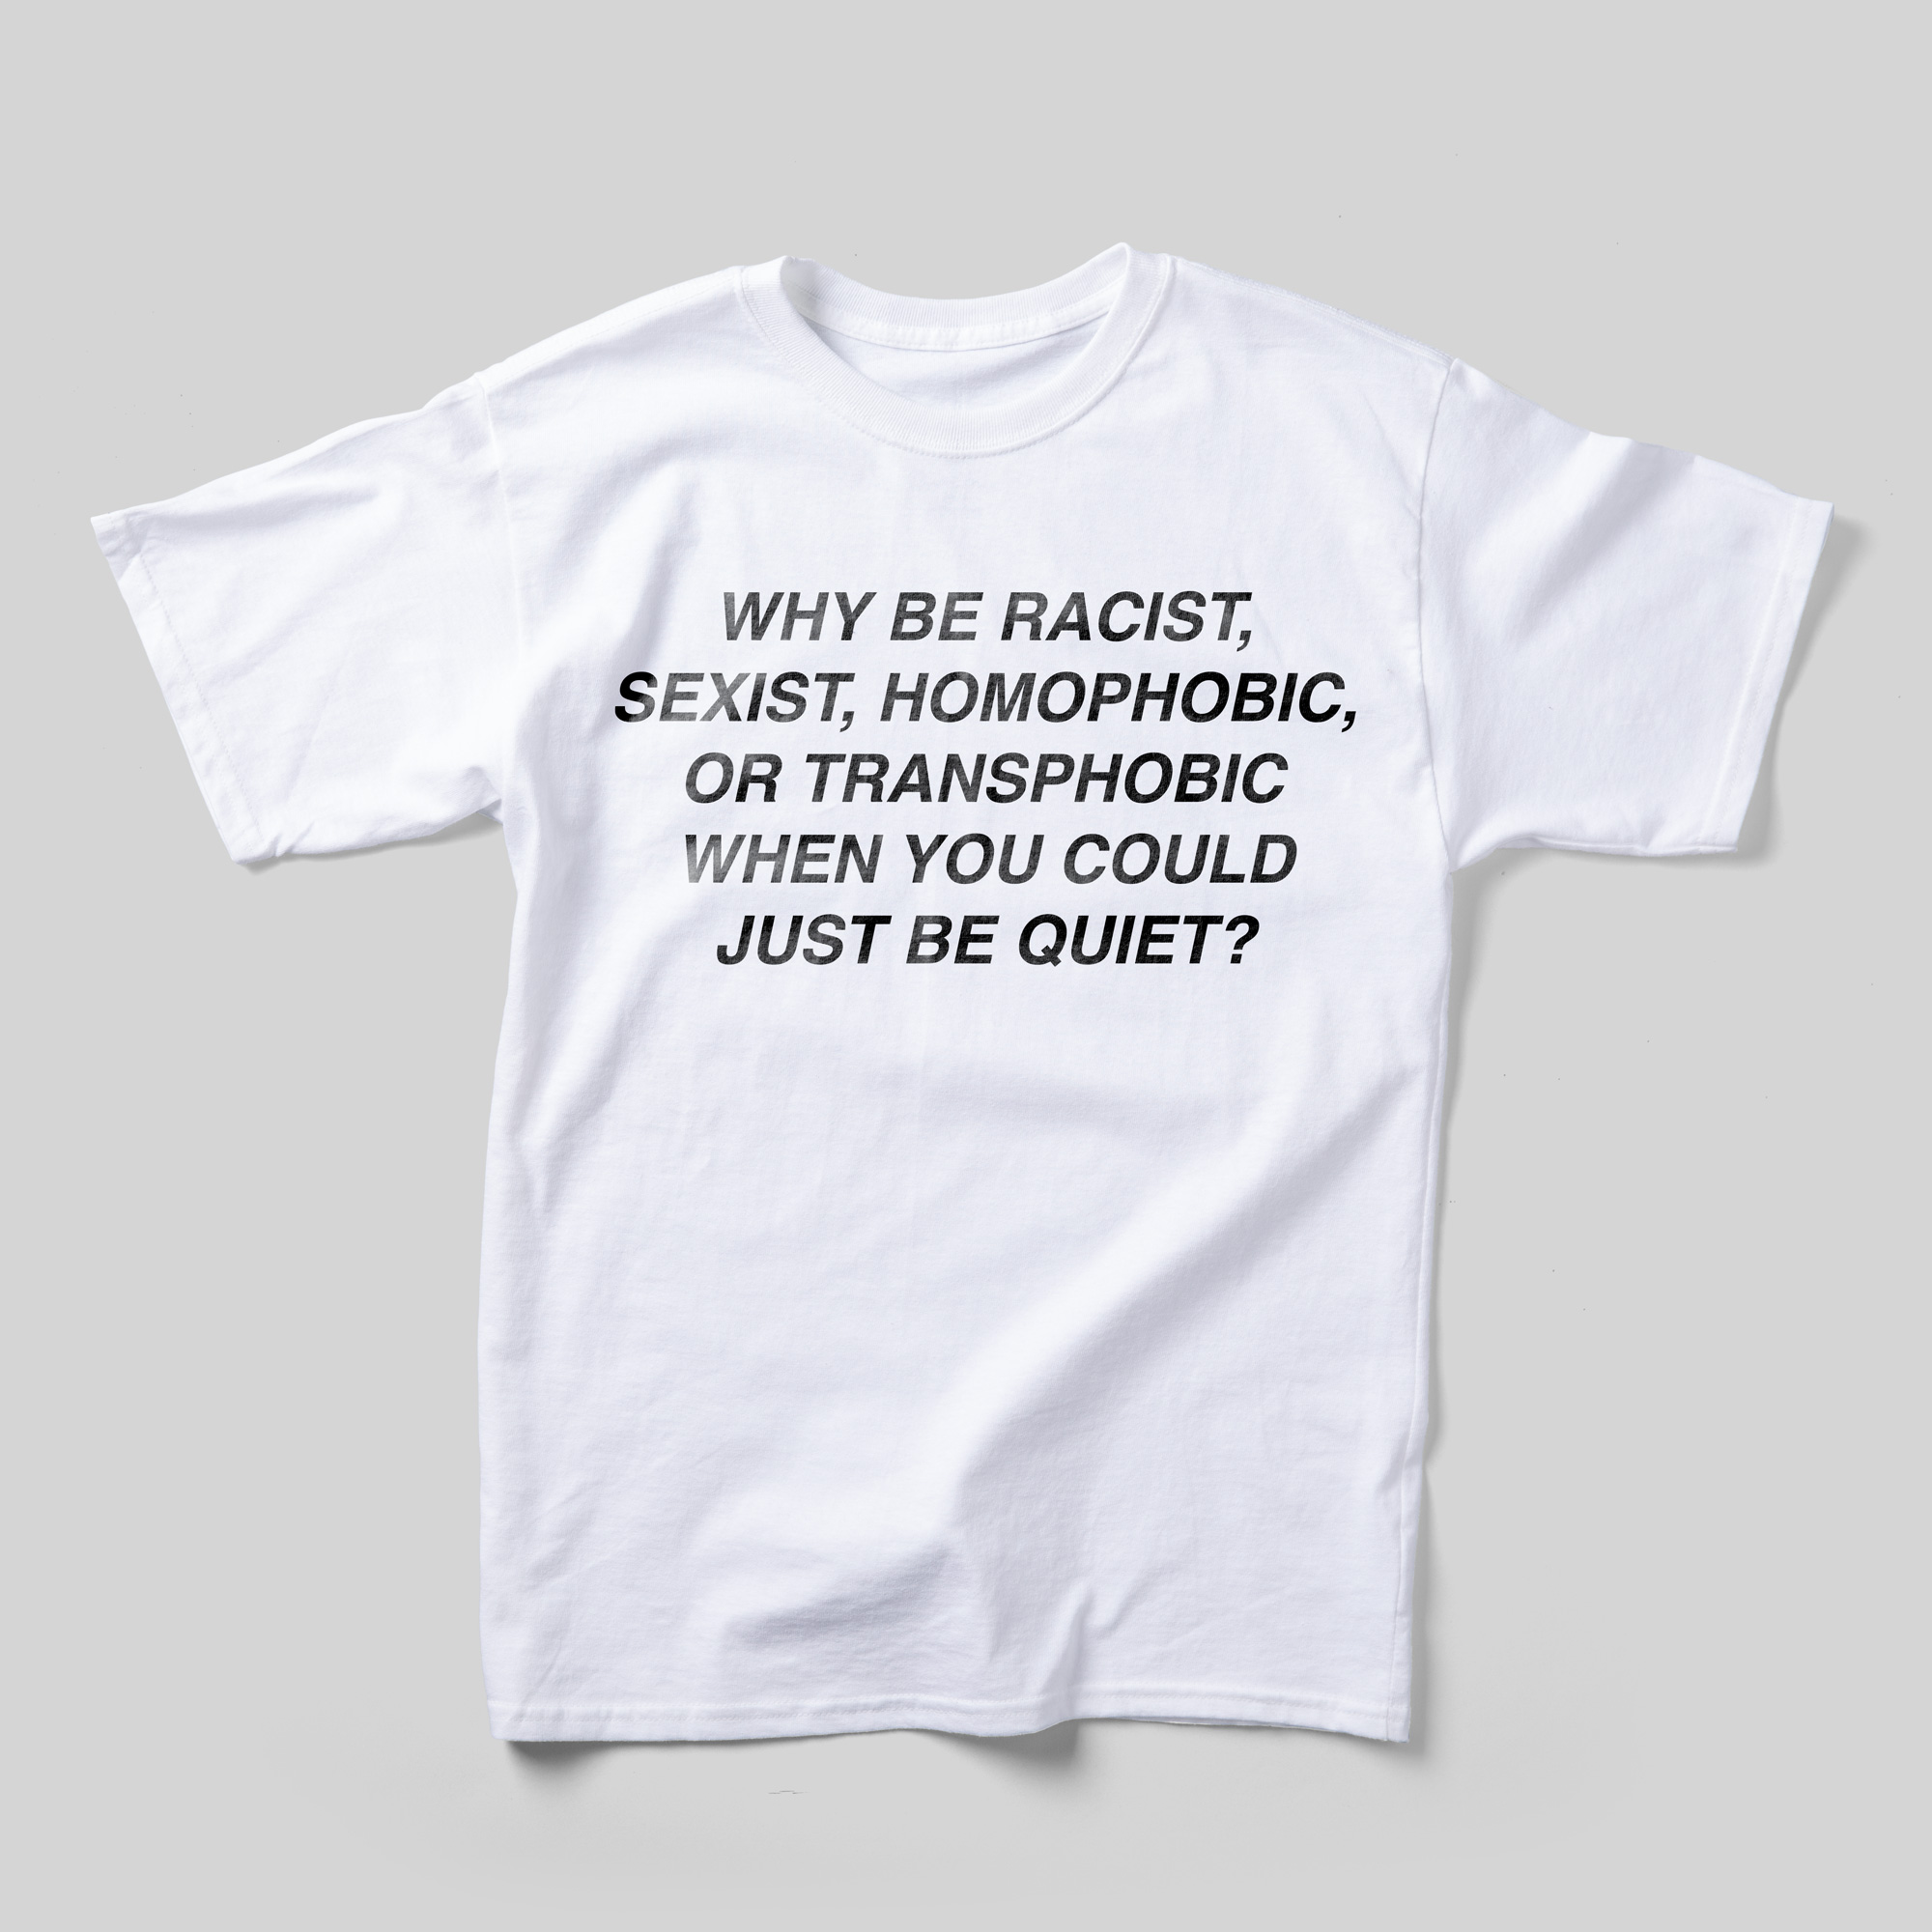 A white t-shirt that reads "Why be racist, sexist, homophobic, or transphobic when you could just be quiet?" in black text.